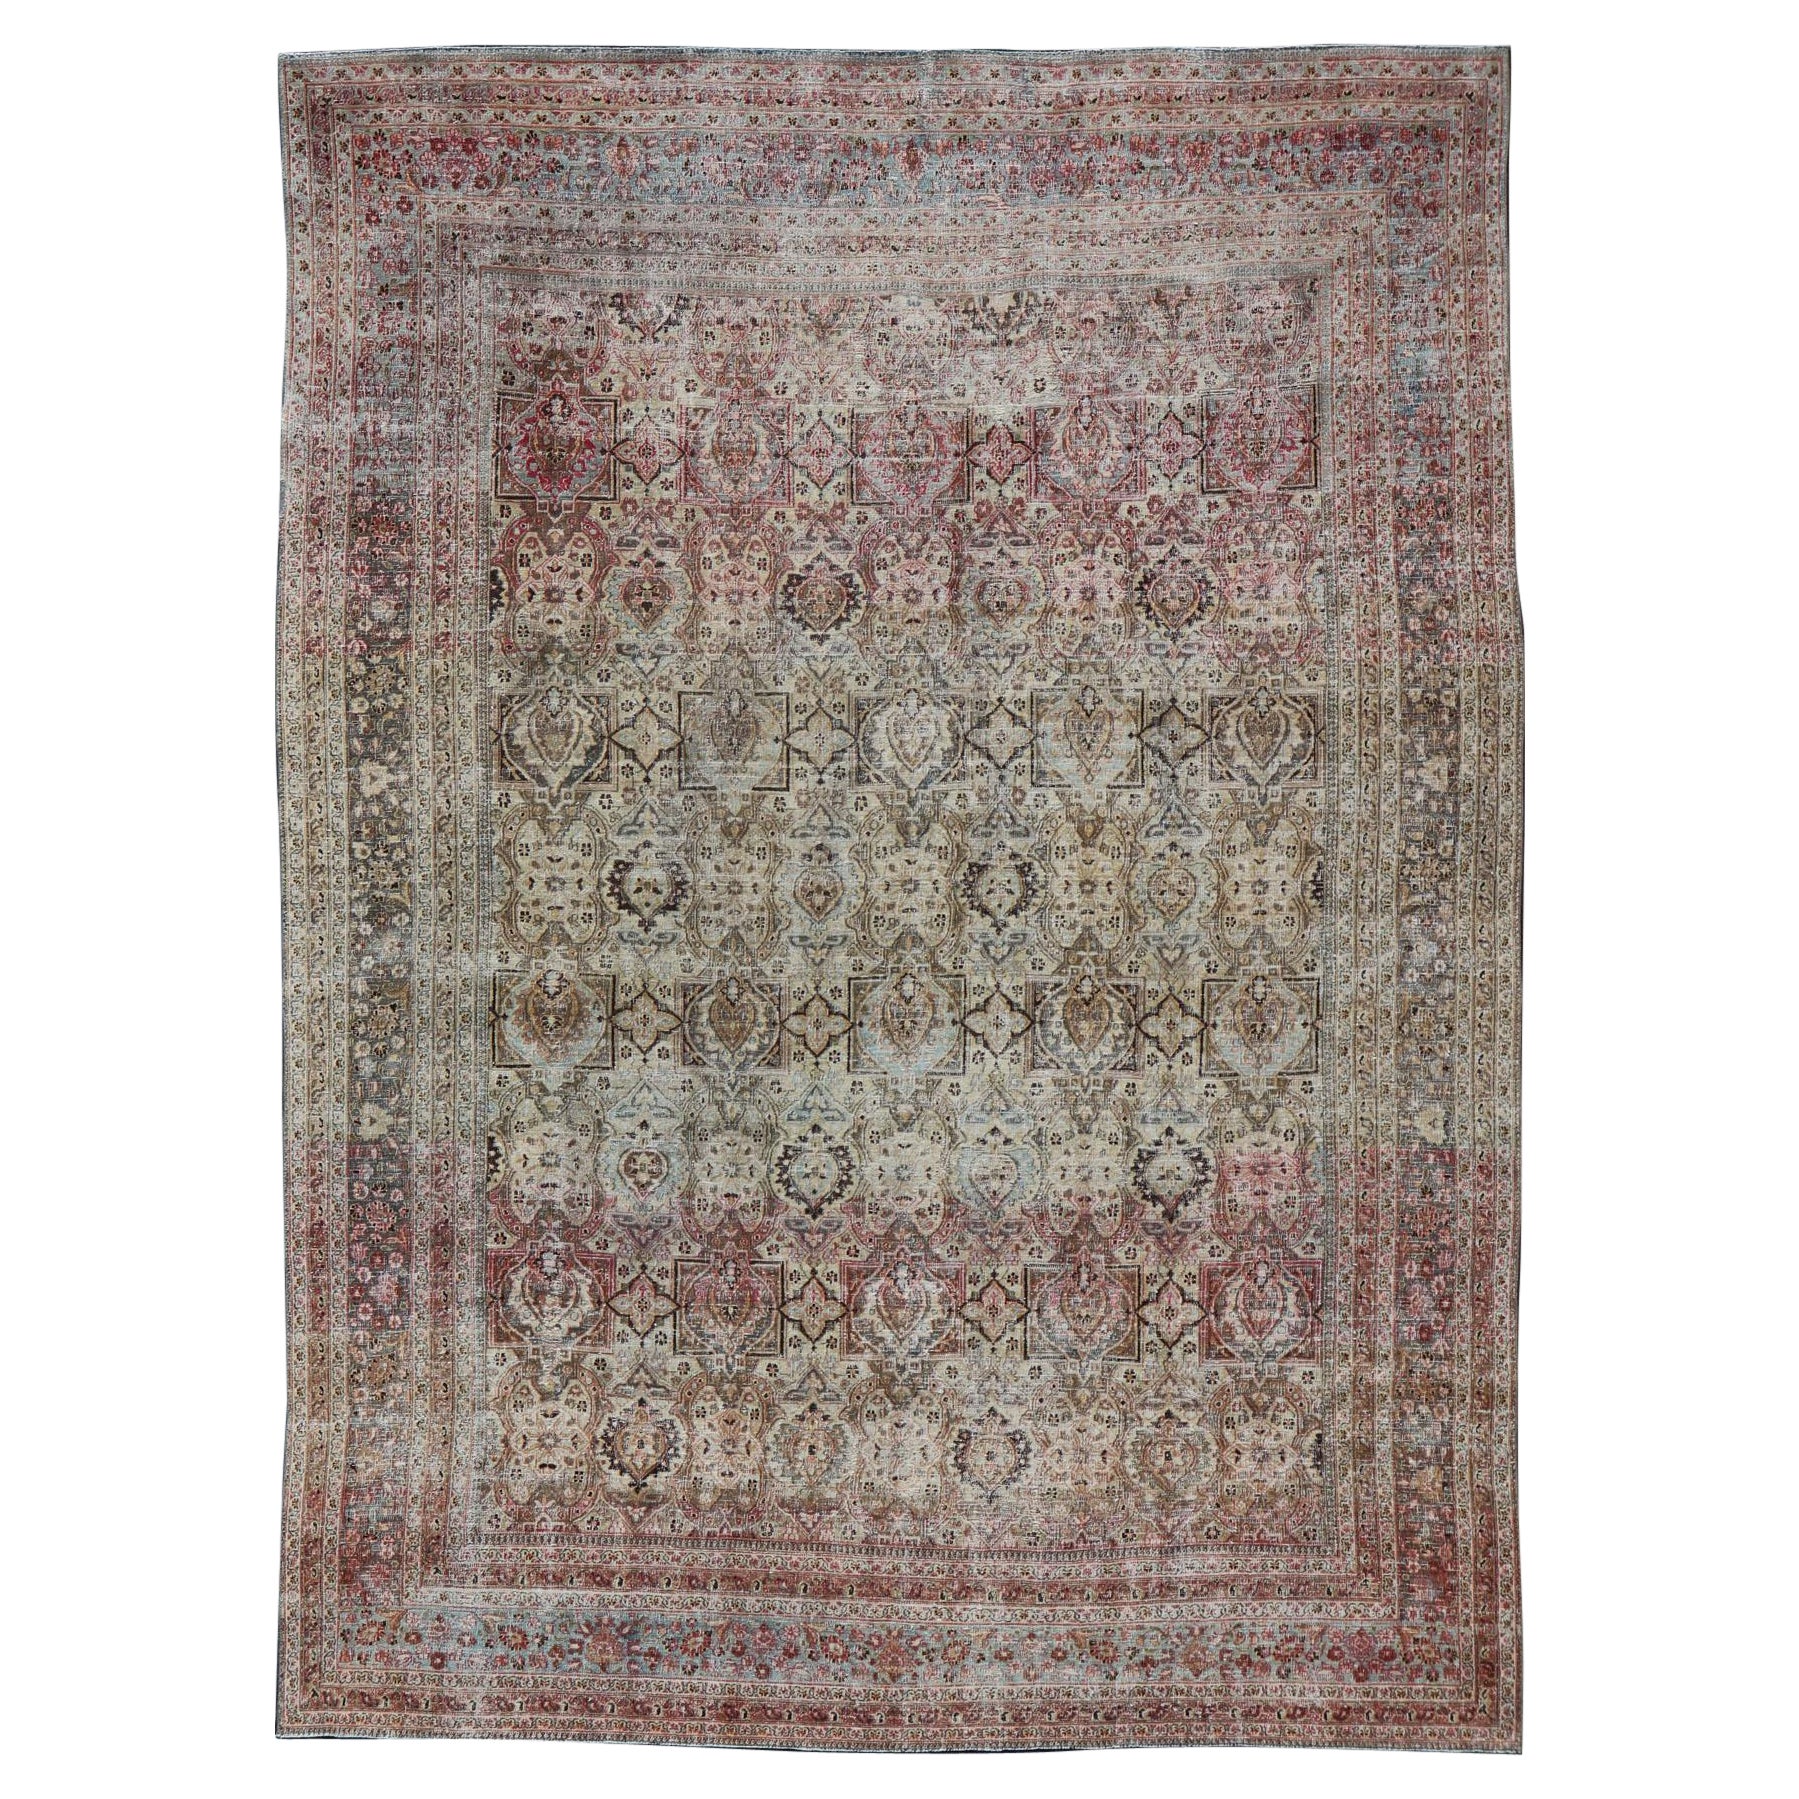  Antique Persian Khorassan Rug with Palmettes, Geometric Flowers in Soft Tones For Sale